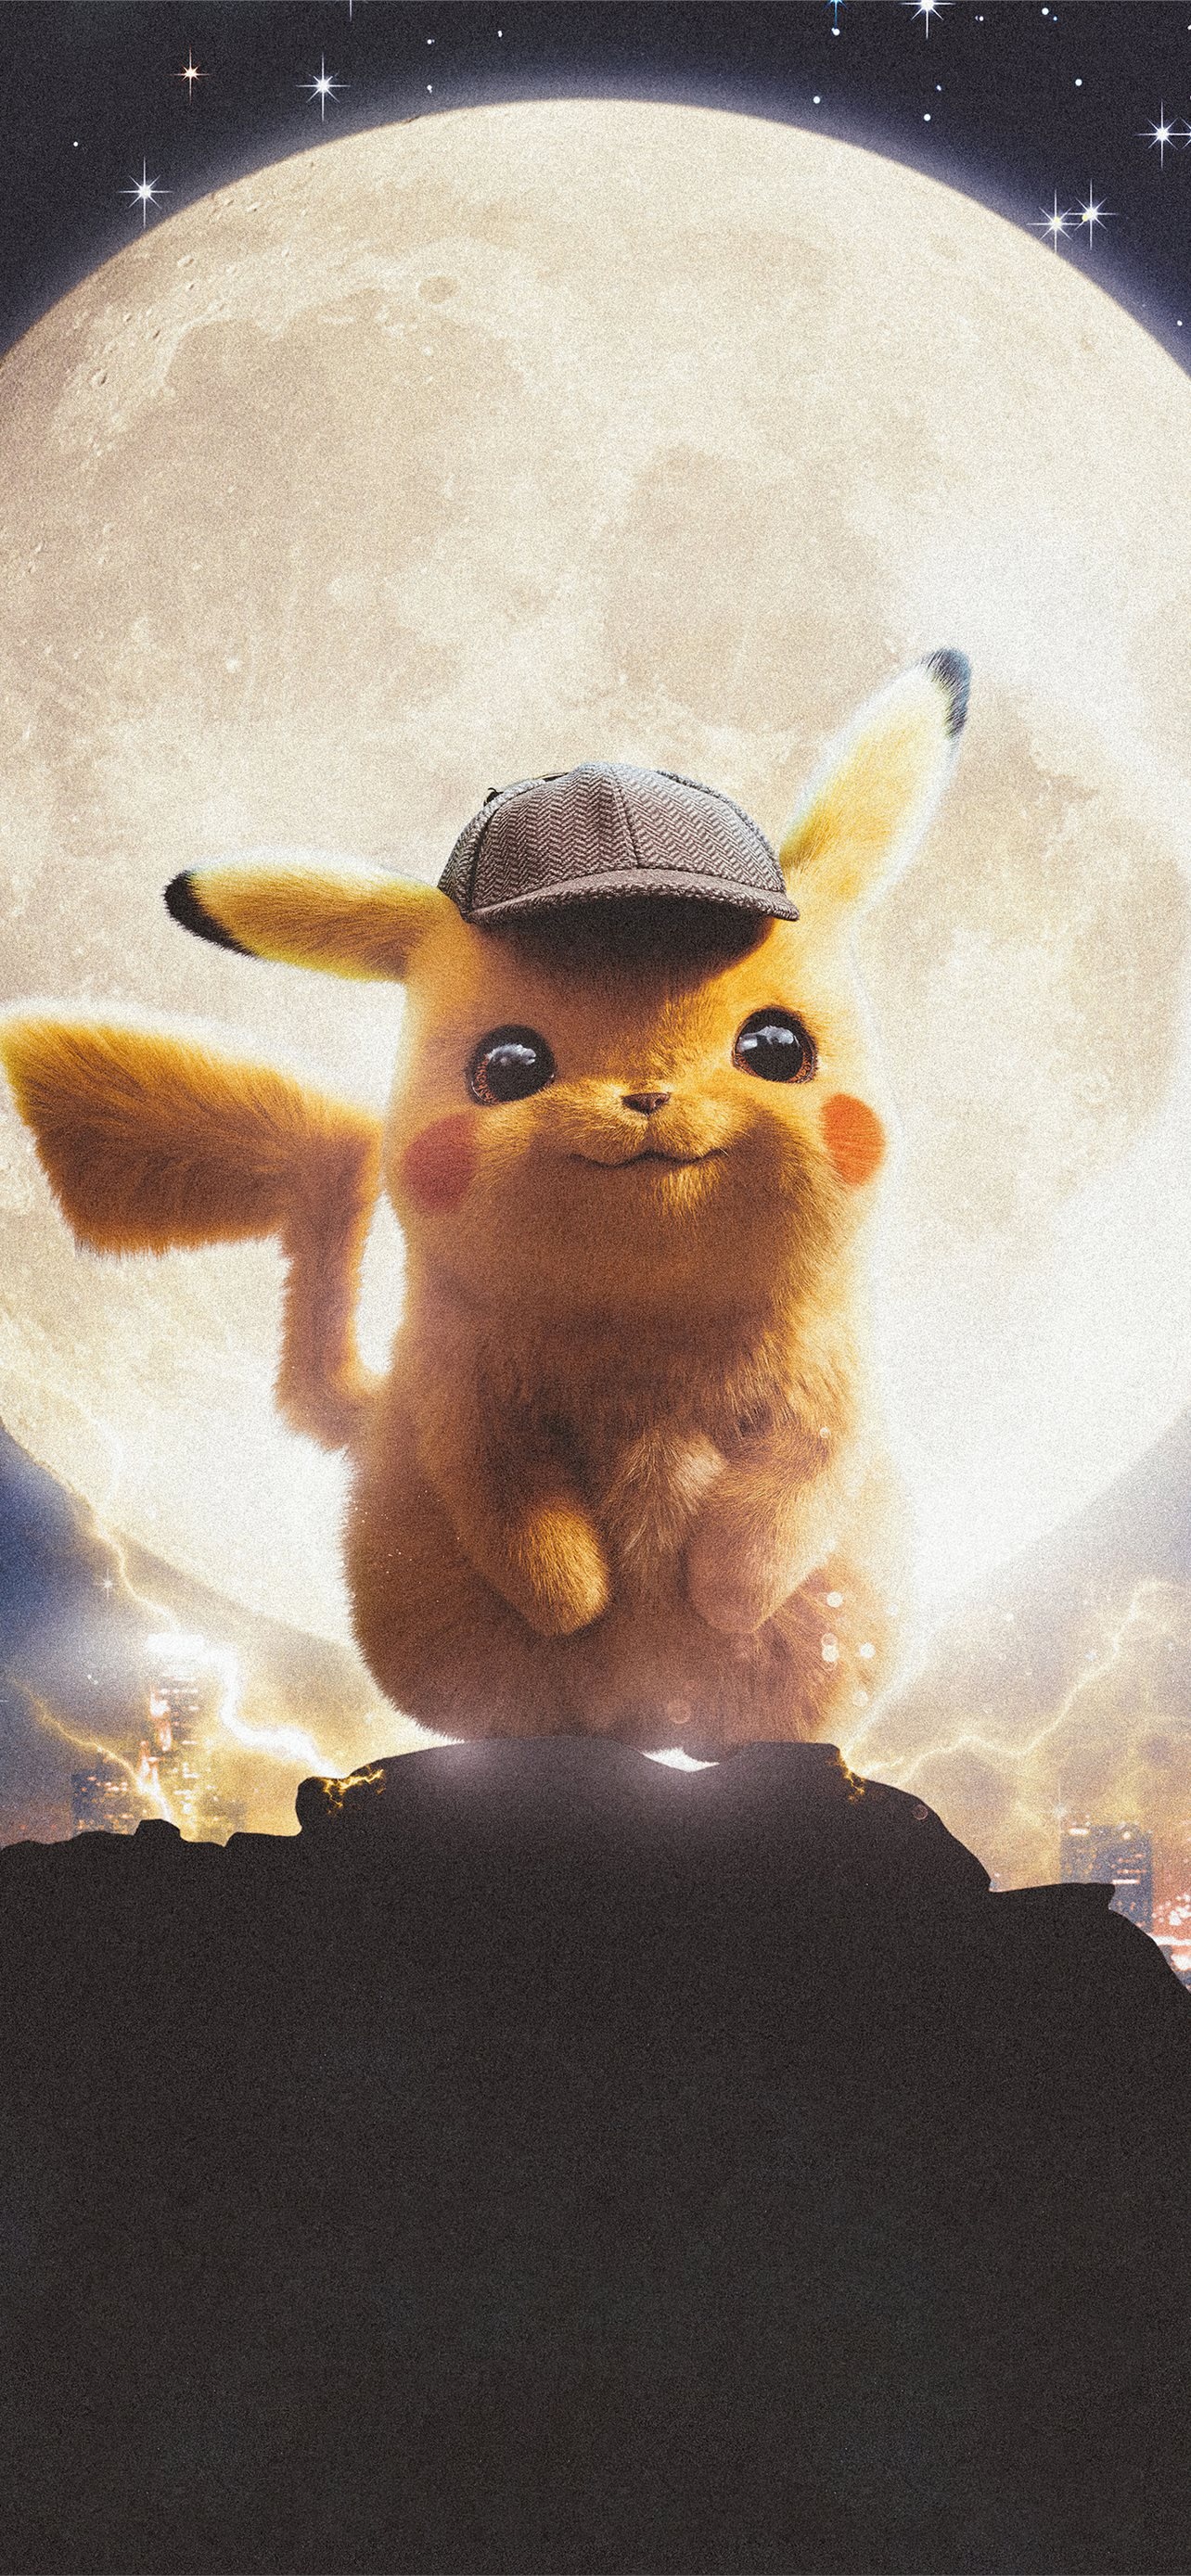 Pokemon Detective Pikachu: A 2019 Video Game Action-Adventure Film By Legendary Pictures. 1290x2780 HD Wallpaper.